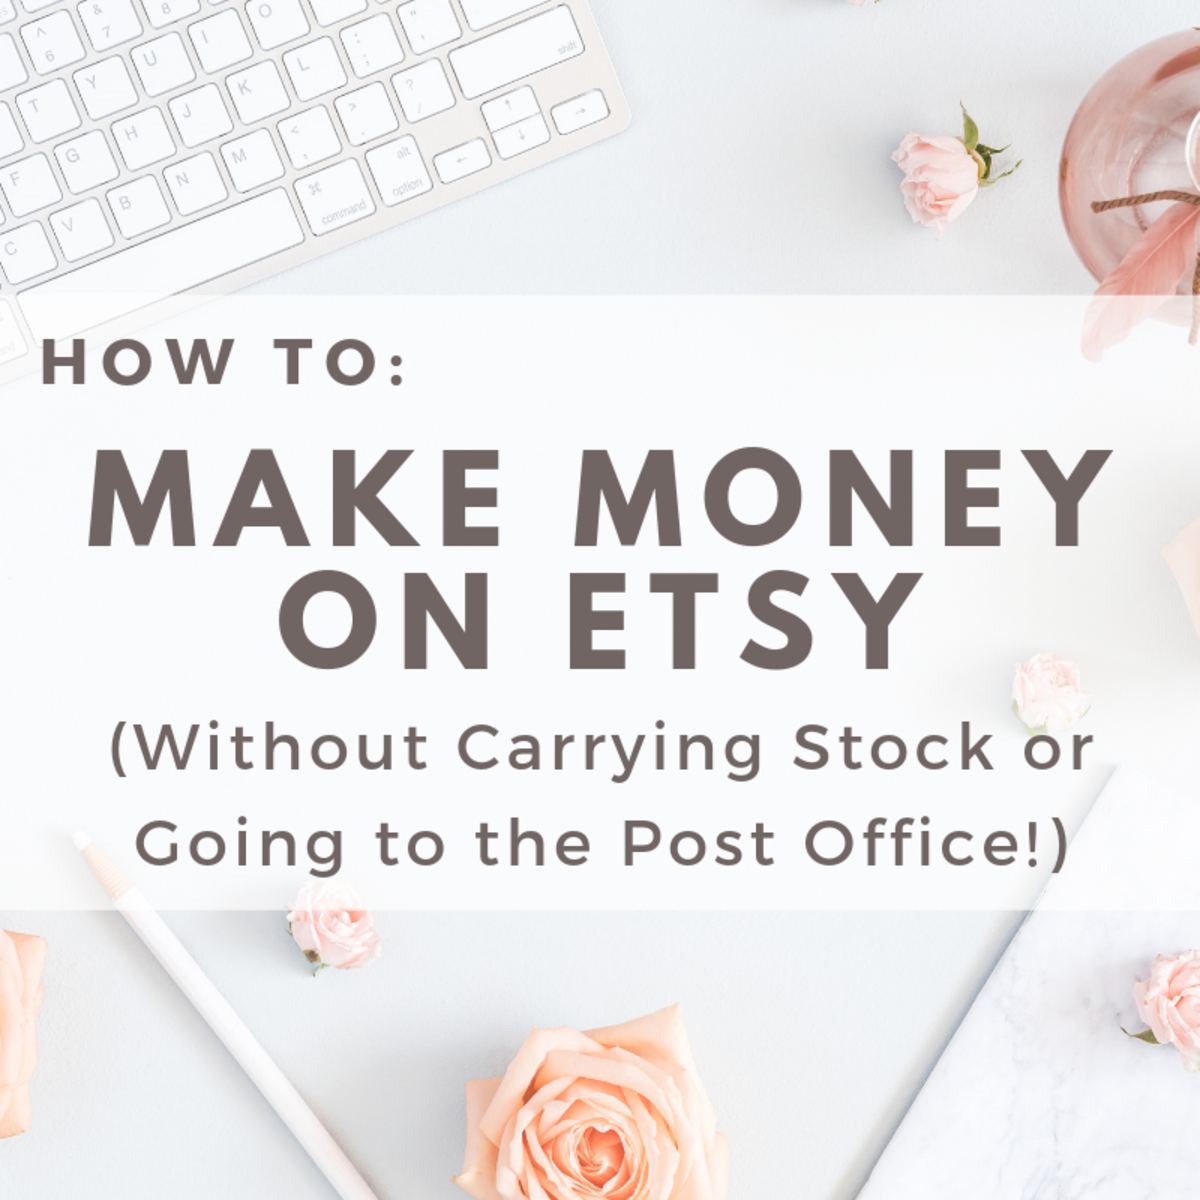 How to Make Money on Etsy Without Carrying Stock or Ever Going to the Post Office